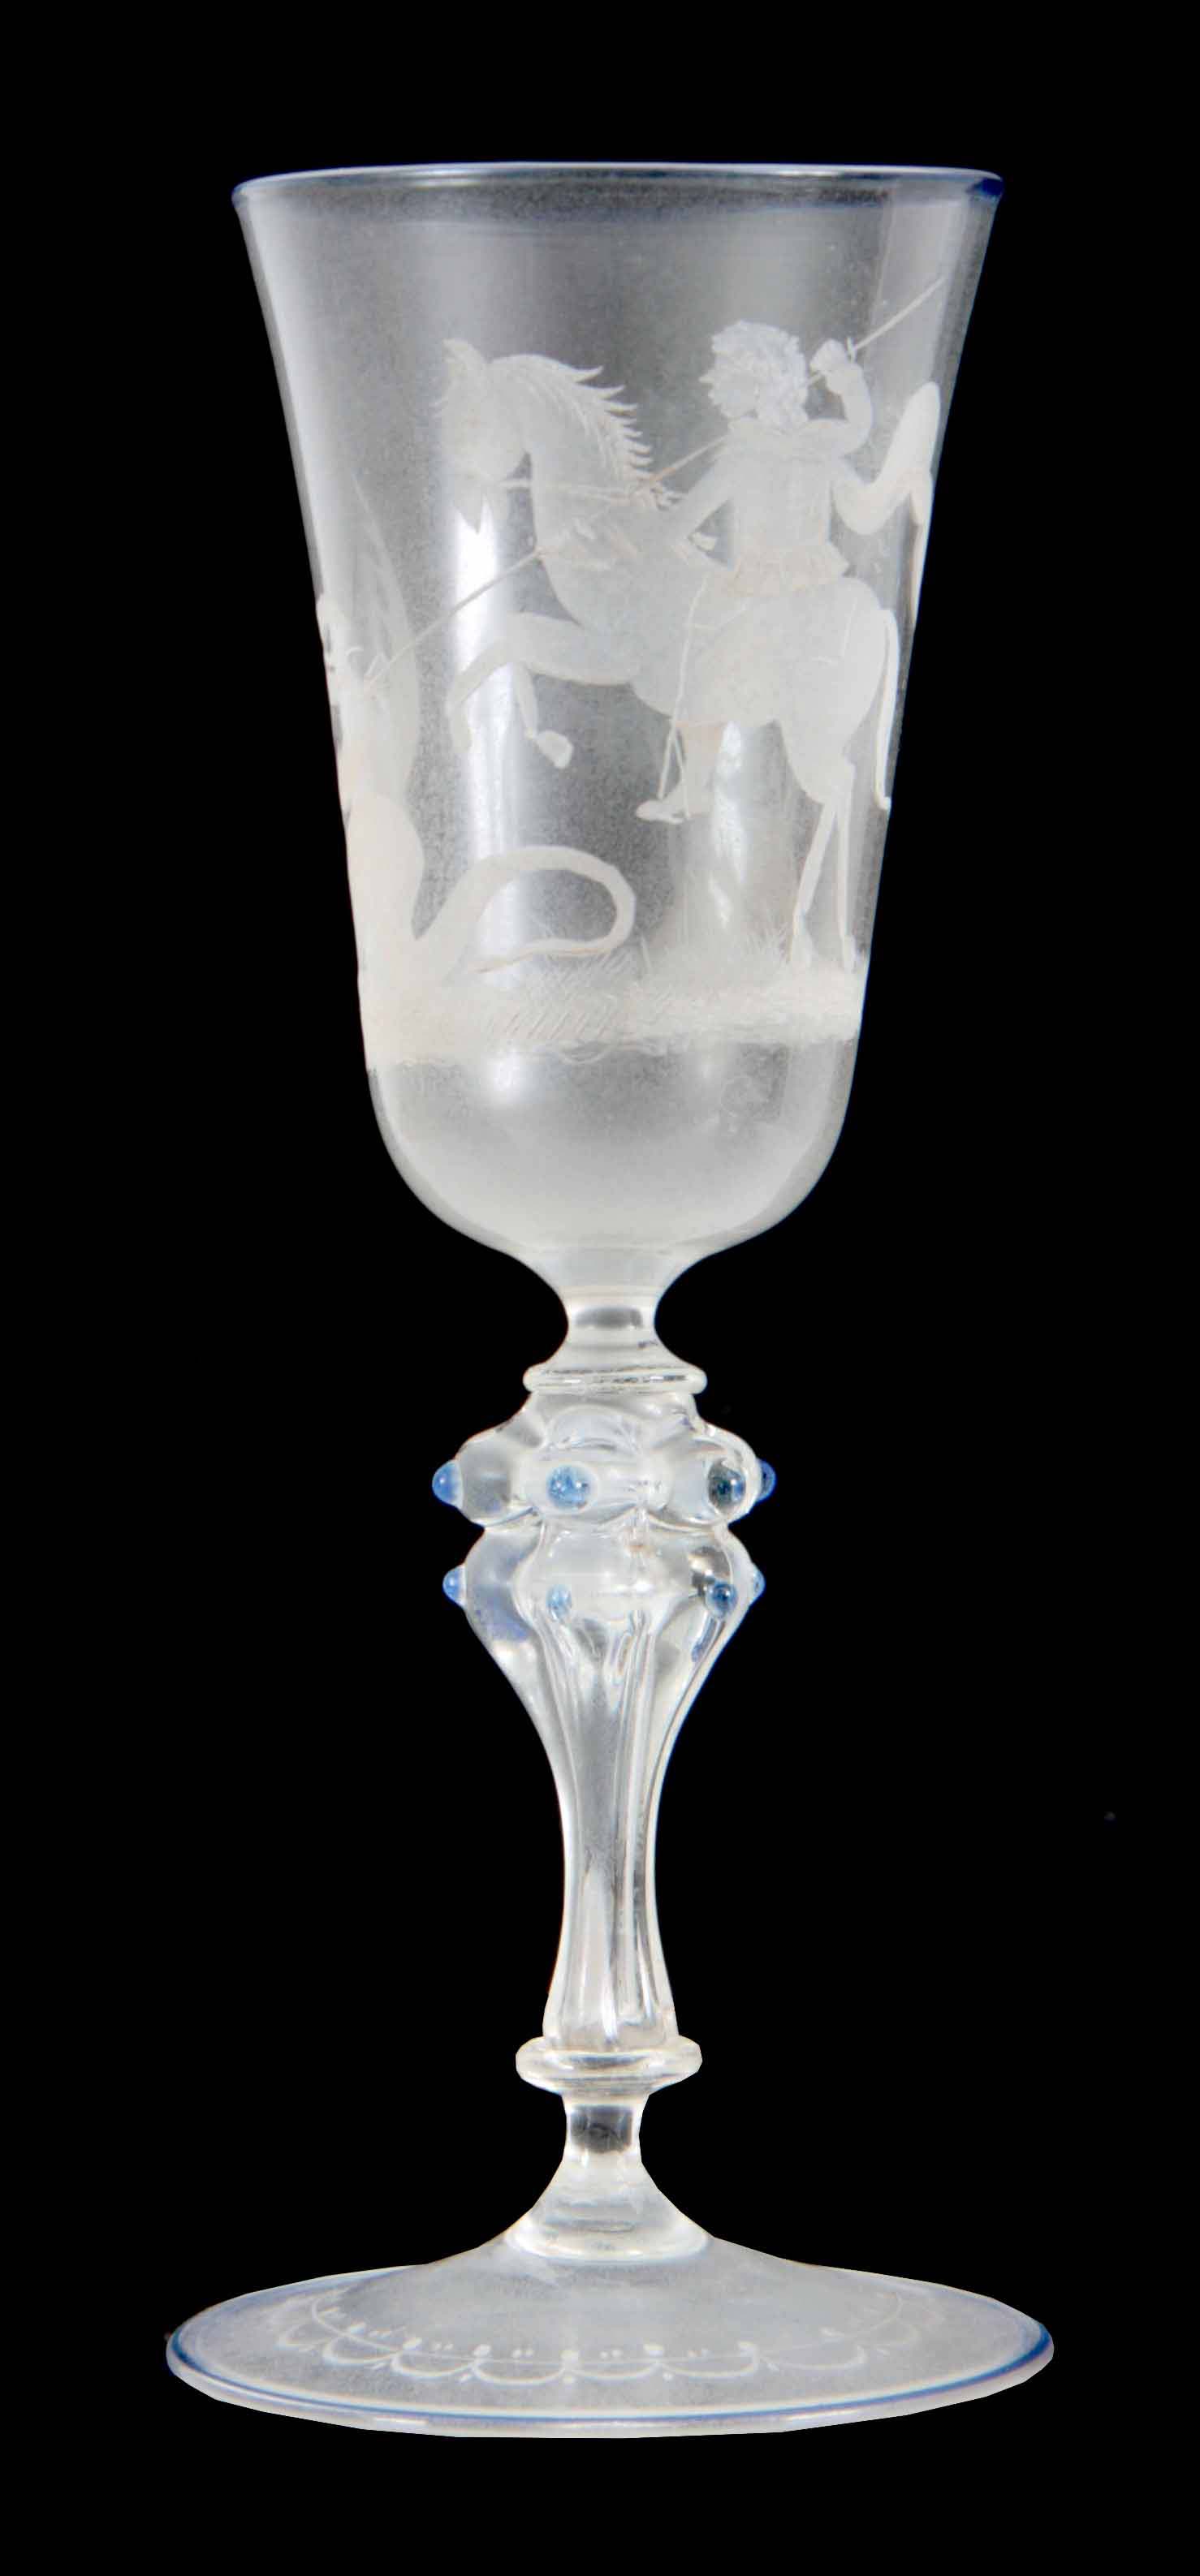 A FINE 20TH CENTURY DRINKING GLASS with fluted bowl engraved with a Gentleman on horseback slaying a